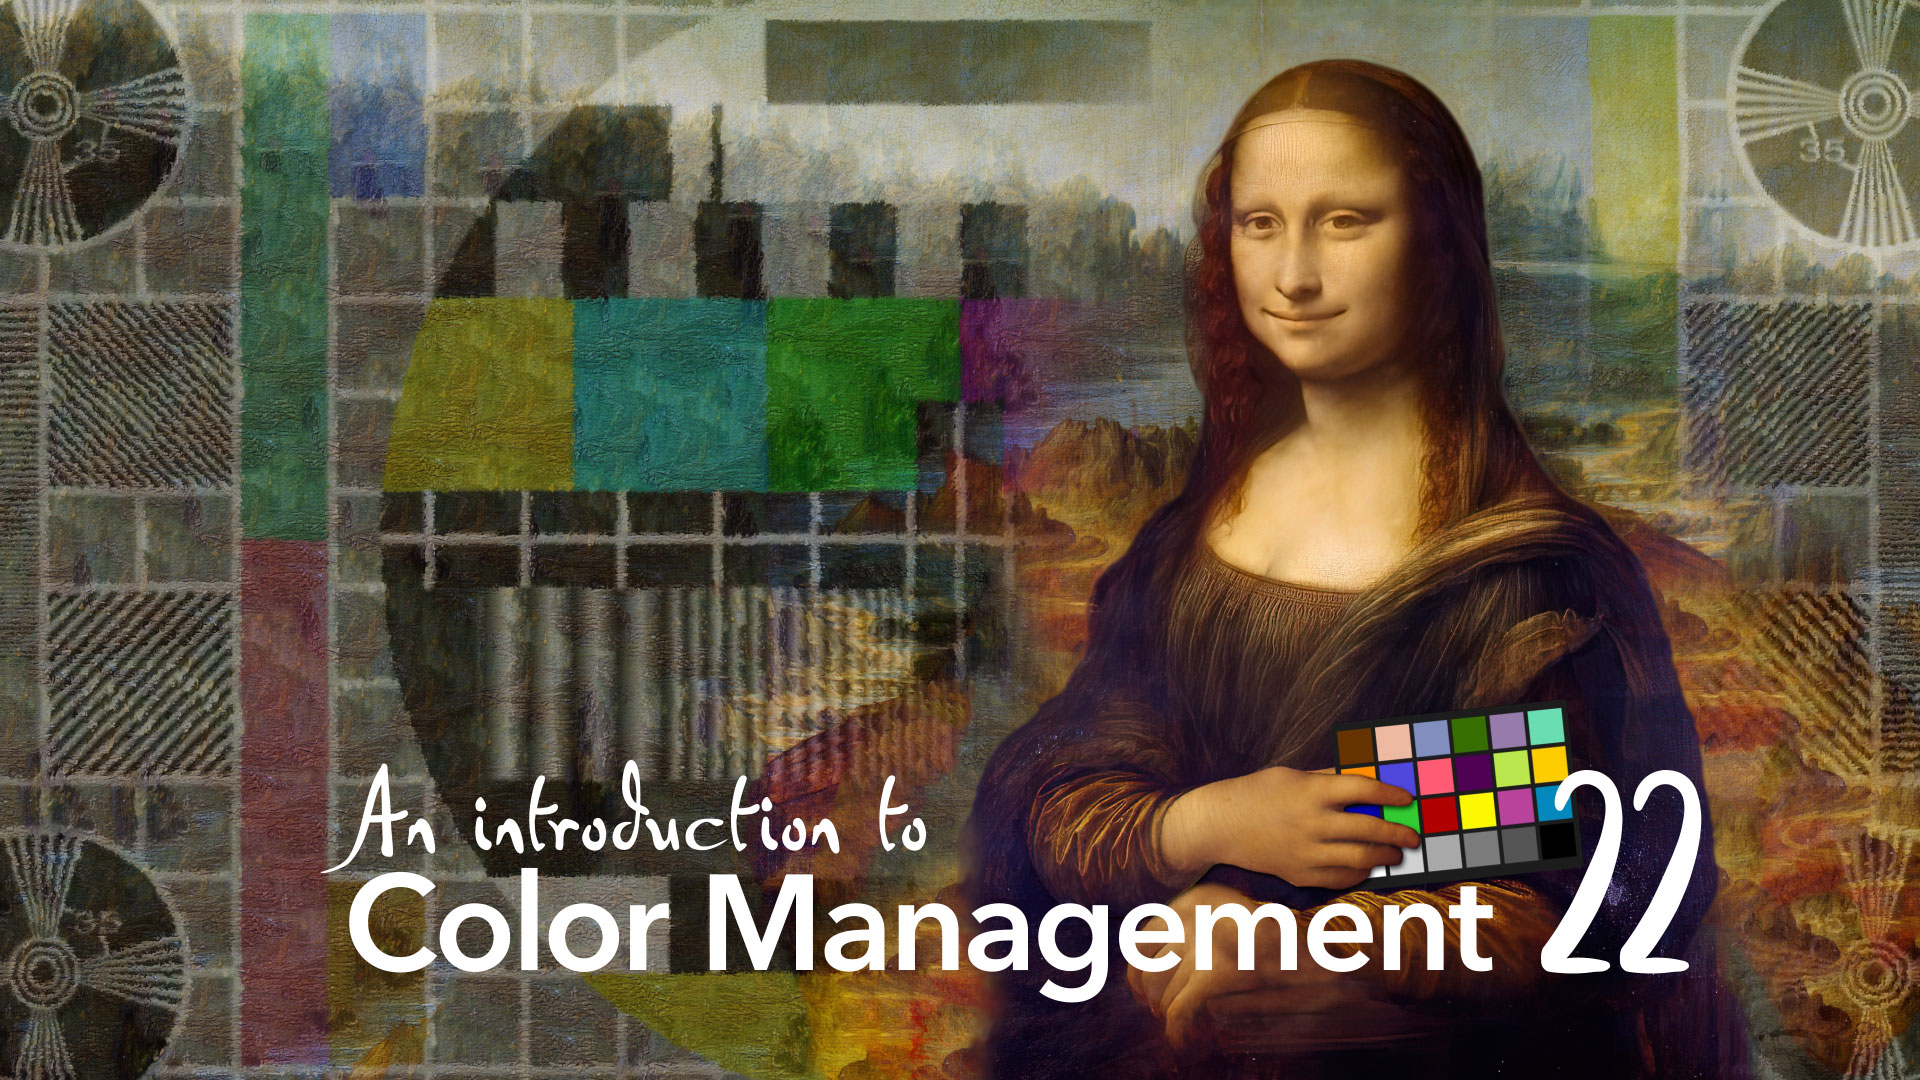 Color Management Part 22: Introducing Tone Mapping 10